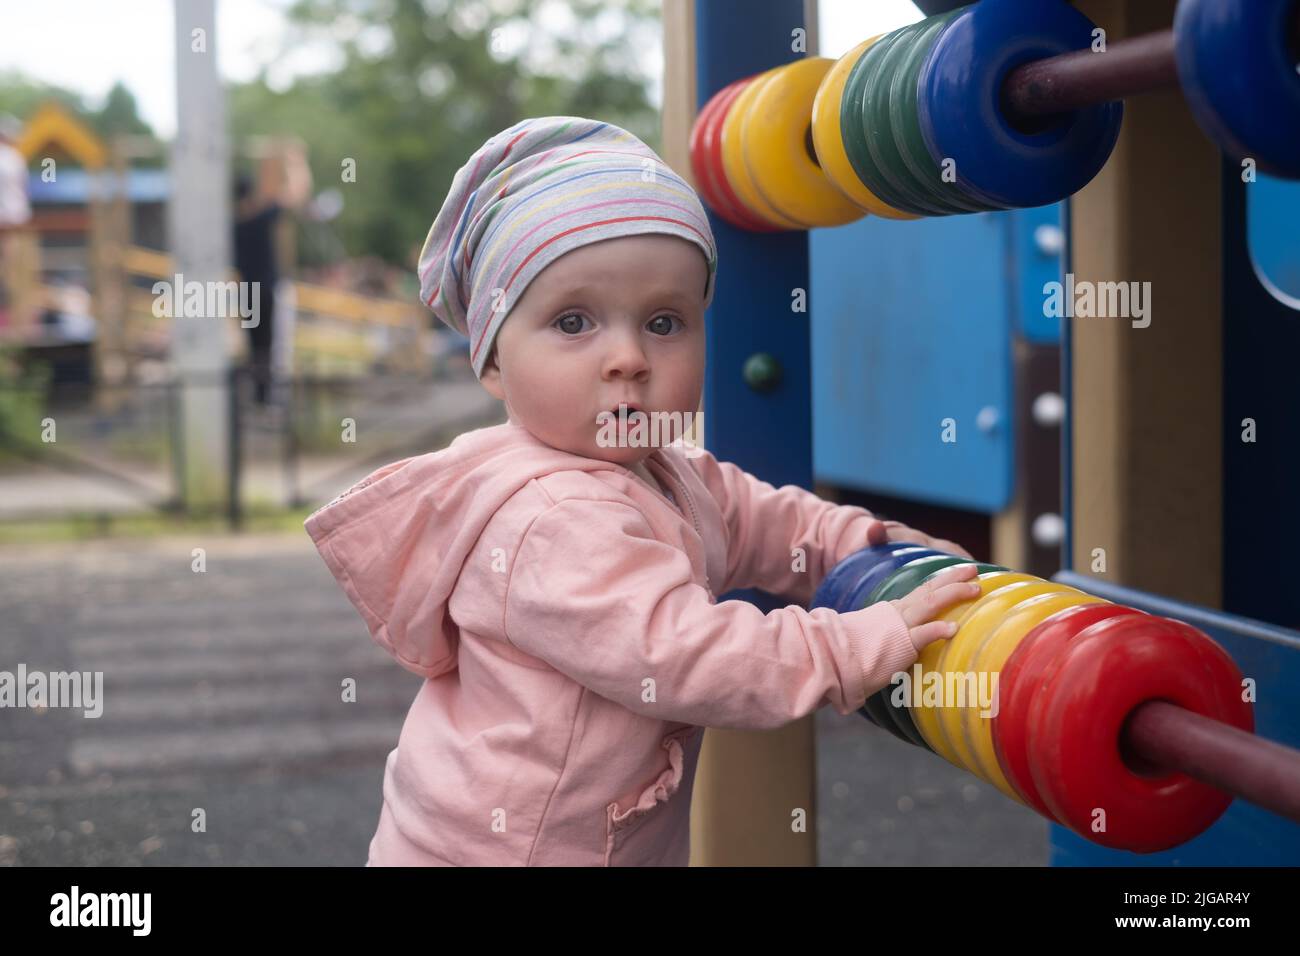 Caucasian baby girl playing with colored rings on playground. Stock Photo